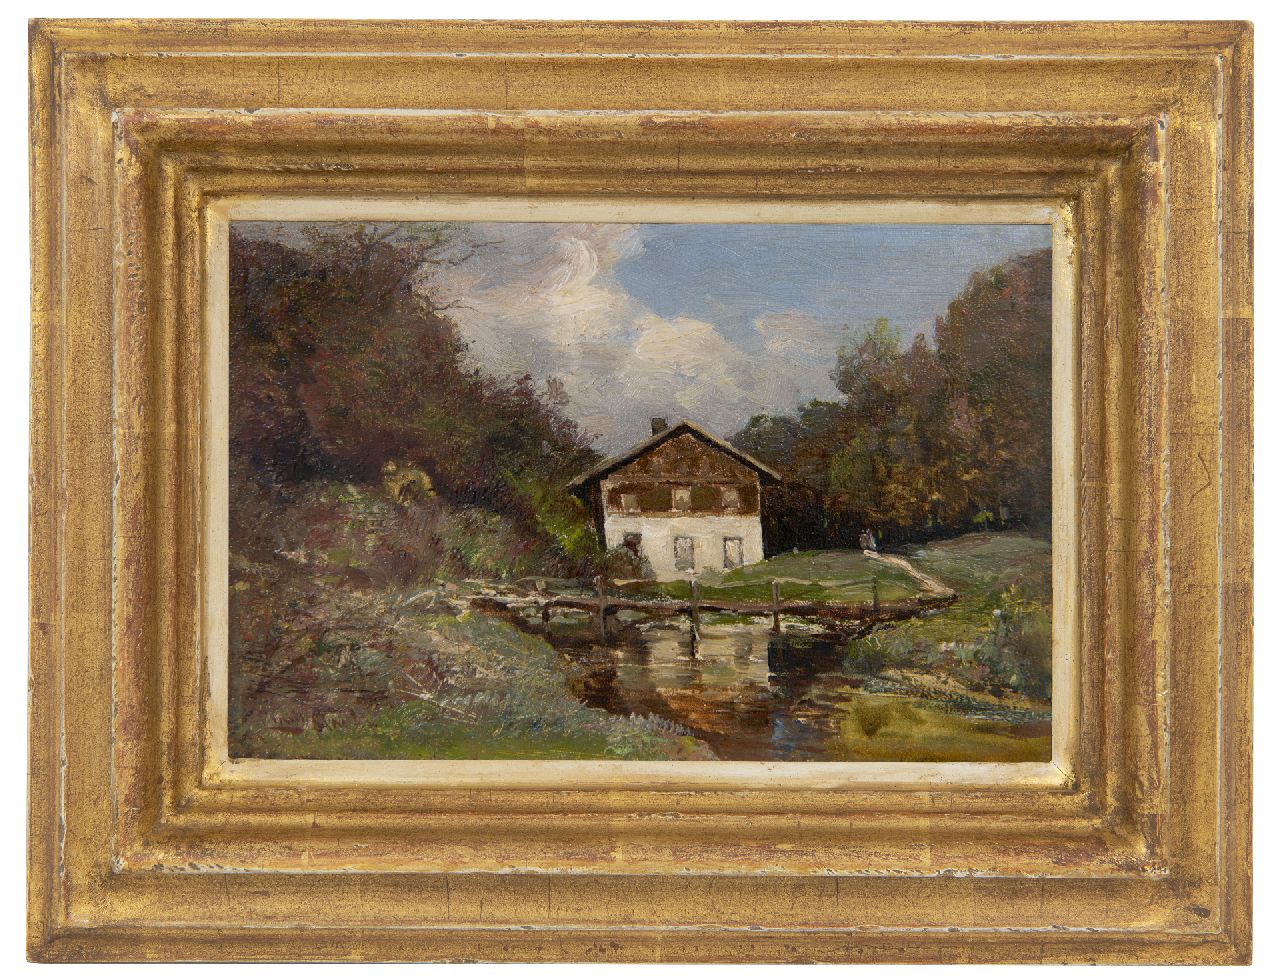 Apol L.F.H.  | Lodewijk Franciscus Hendrik 'Louis' Apol, Hotel Beekhuizen in Velp, oil on canvas 14.3 x 21.5 cm, signed l.l.